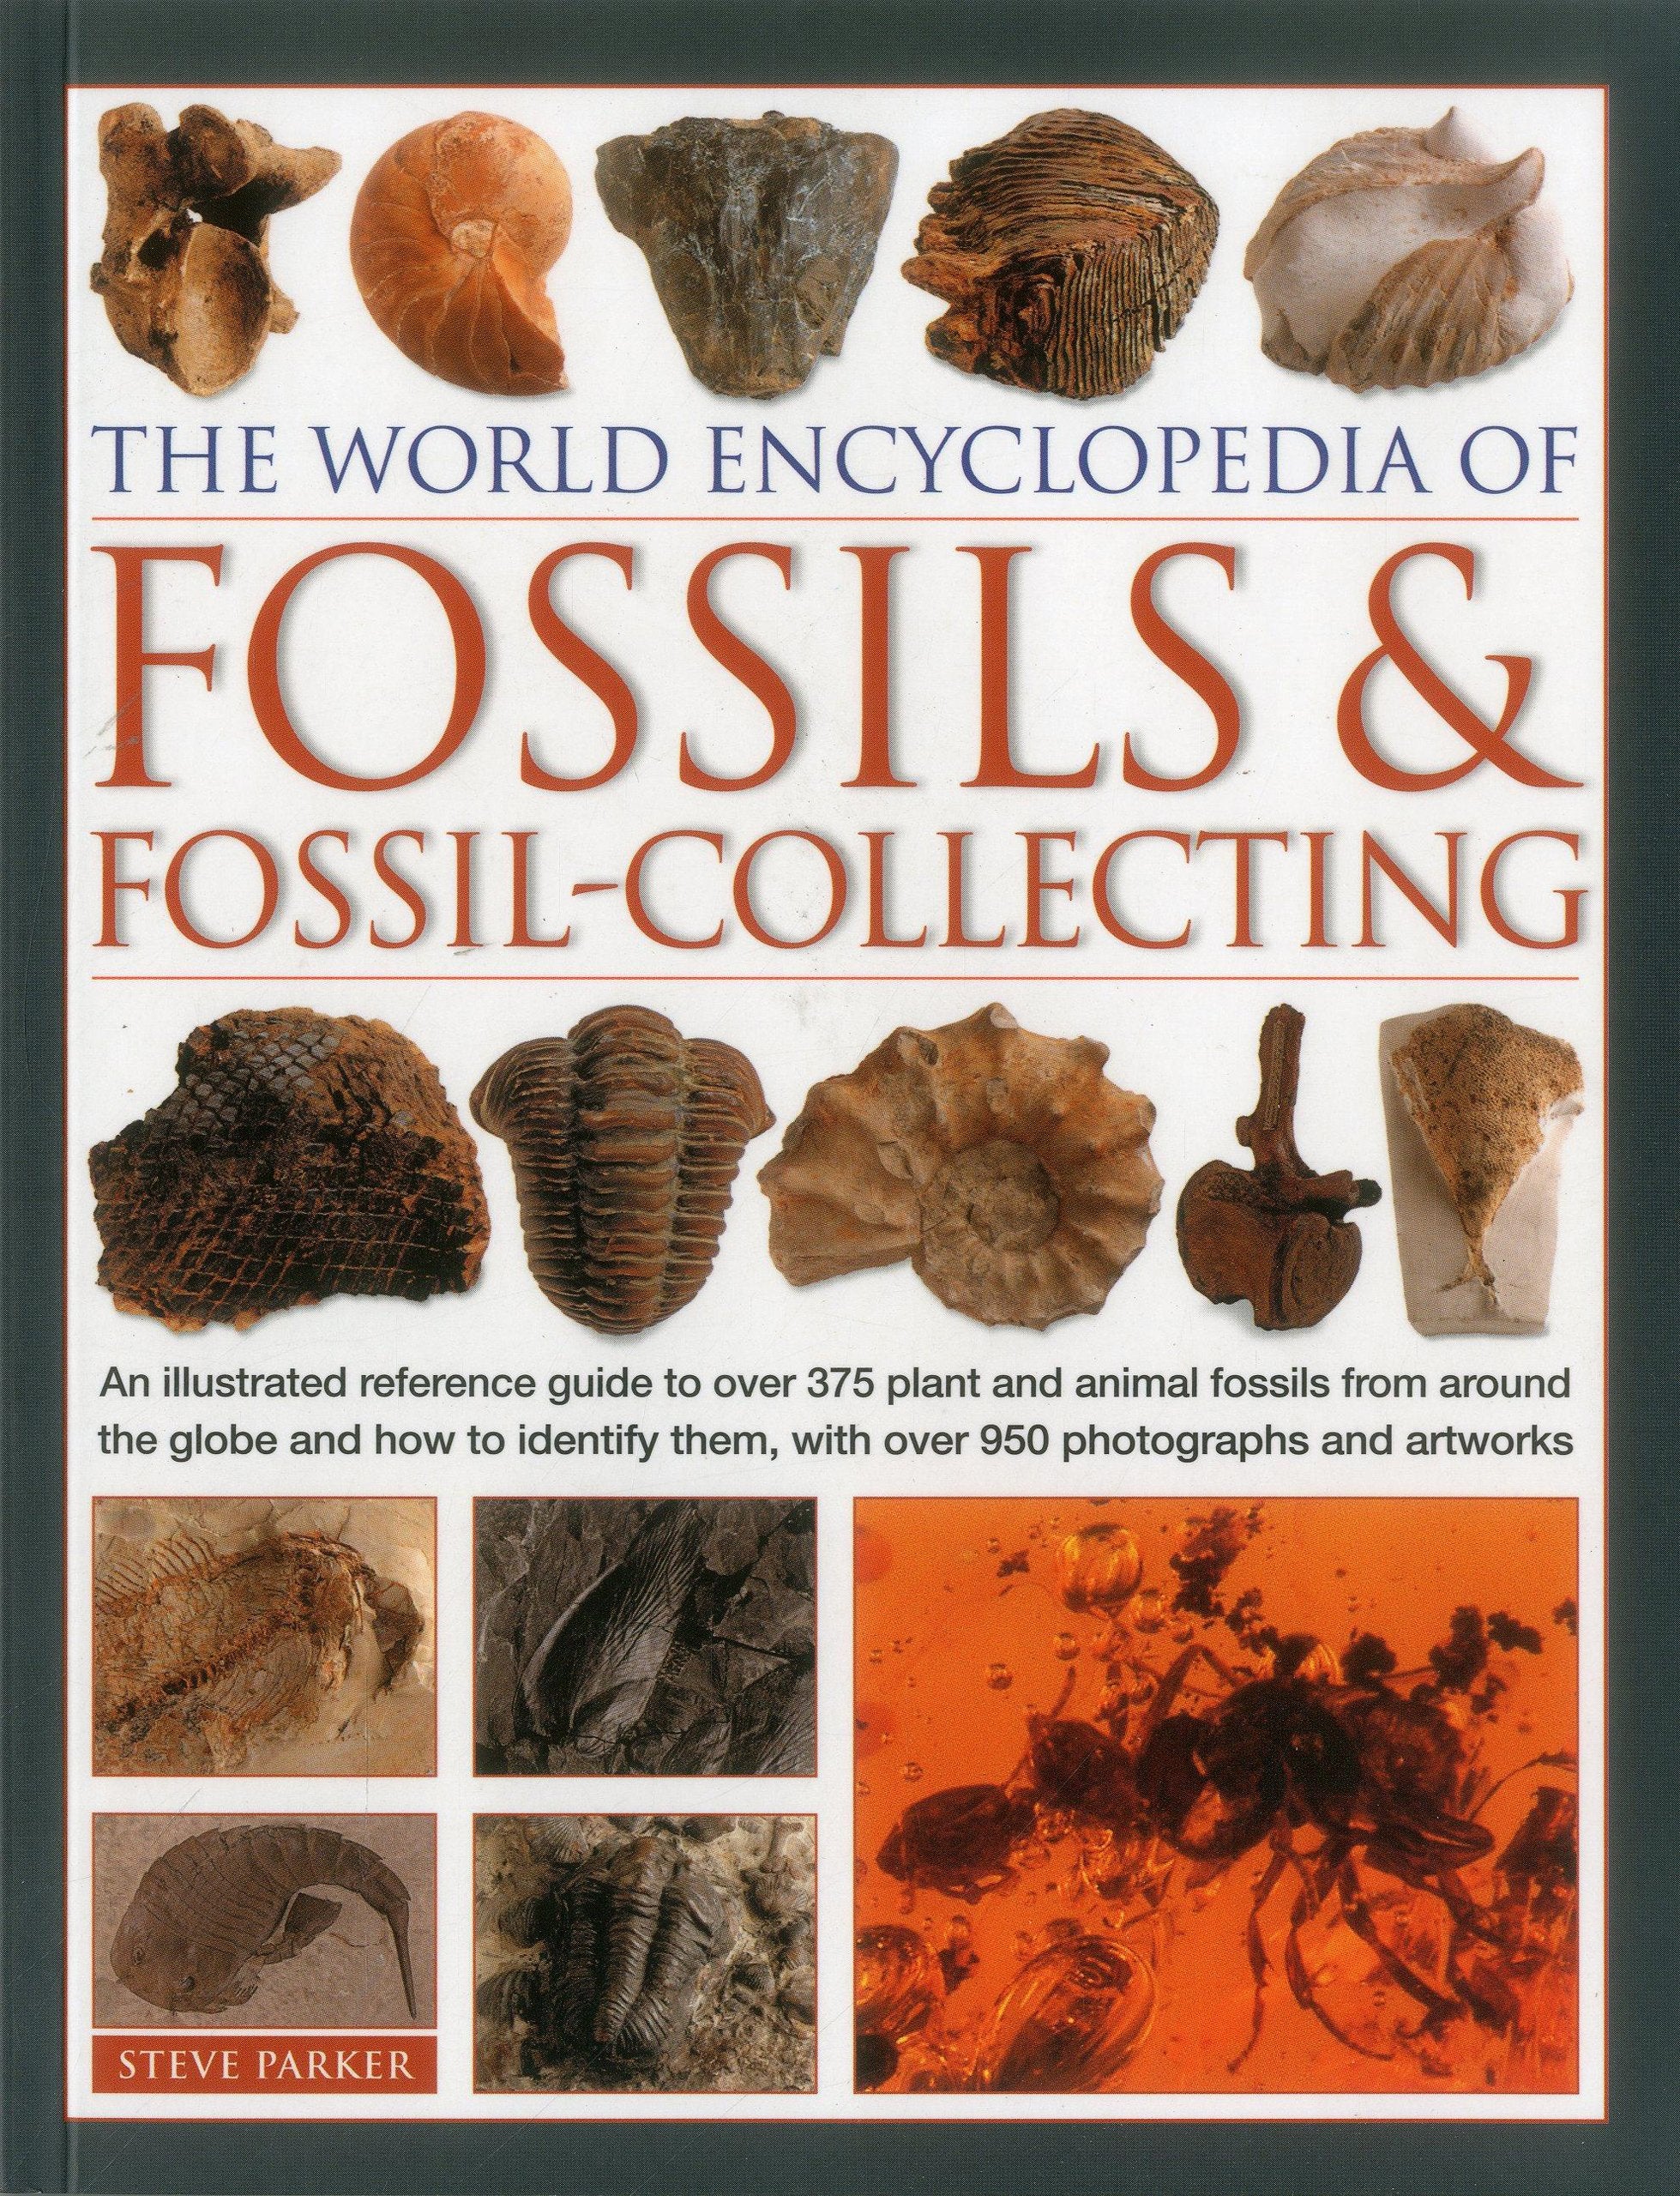 The World Encyclopedia of Fossils & Fossil-Collecting – Natural